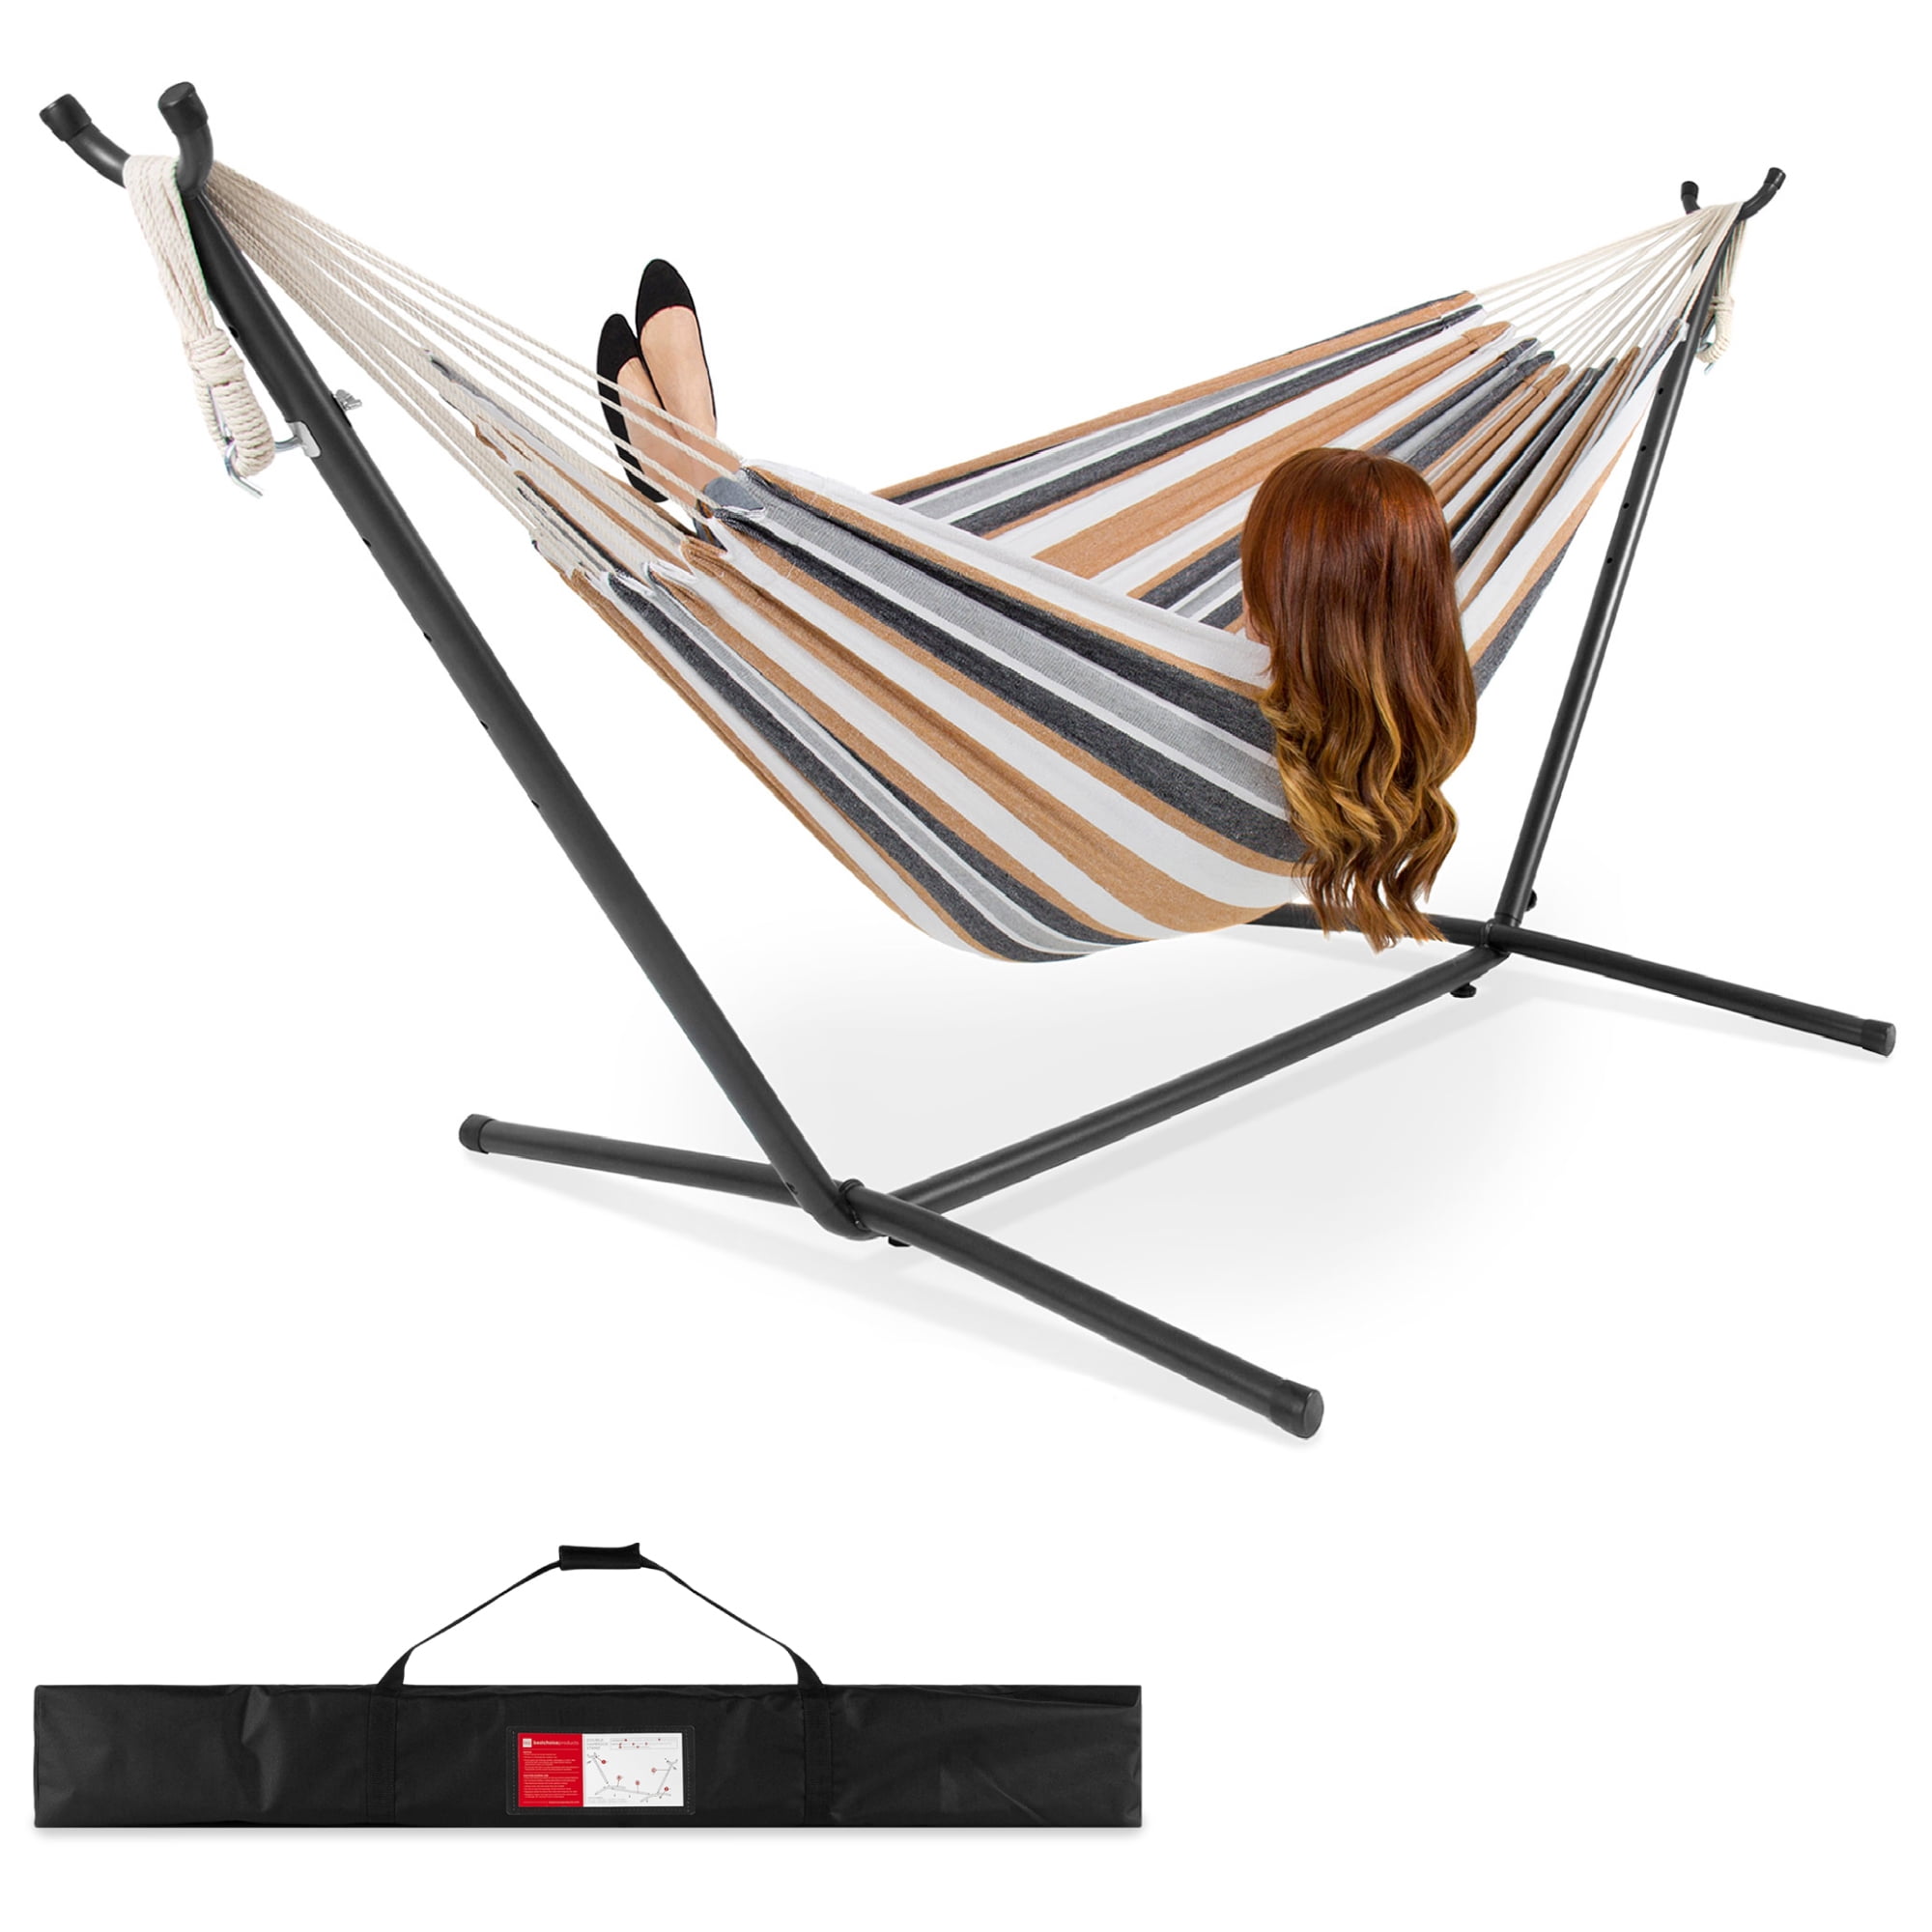 Double Hammock With Space Saving Steel Stand Patio W/ Portable Carrying Case 3 